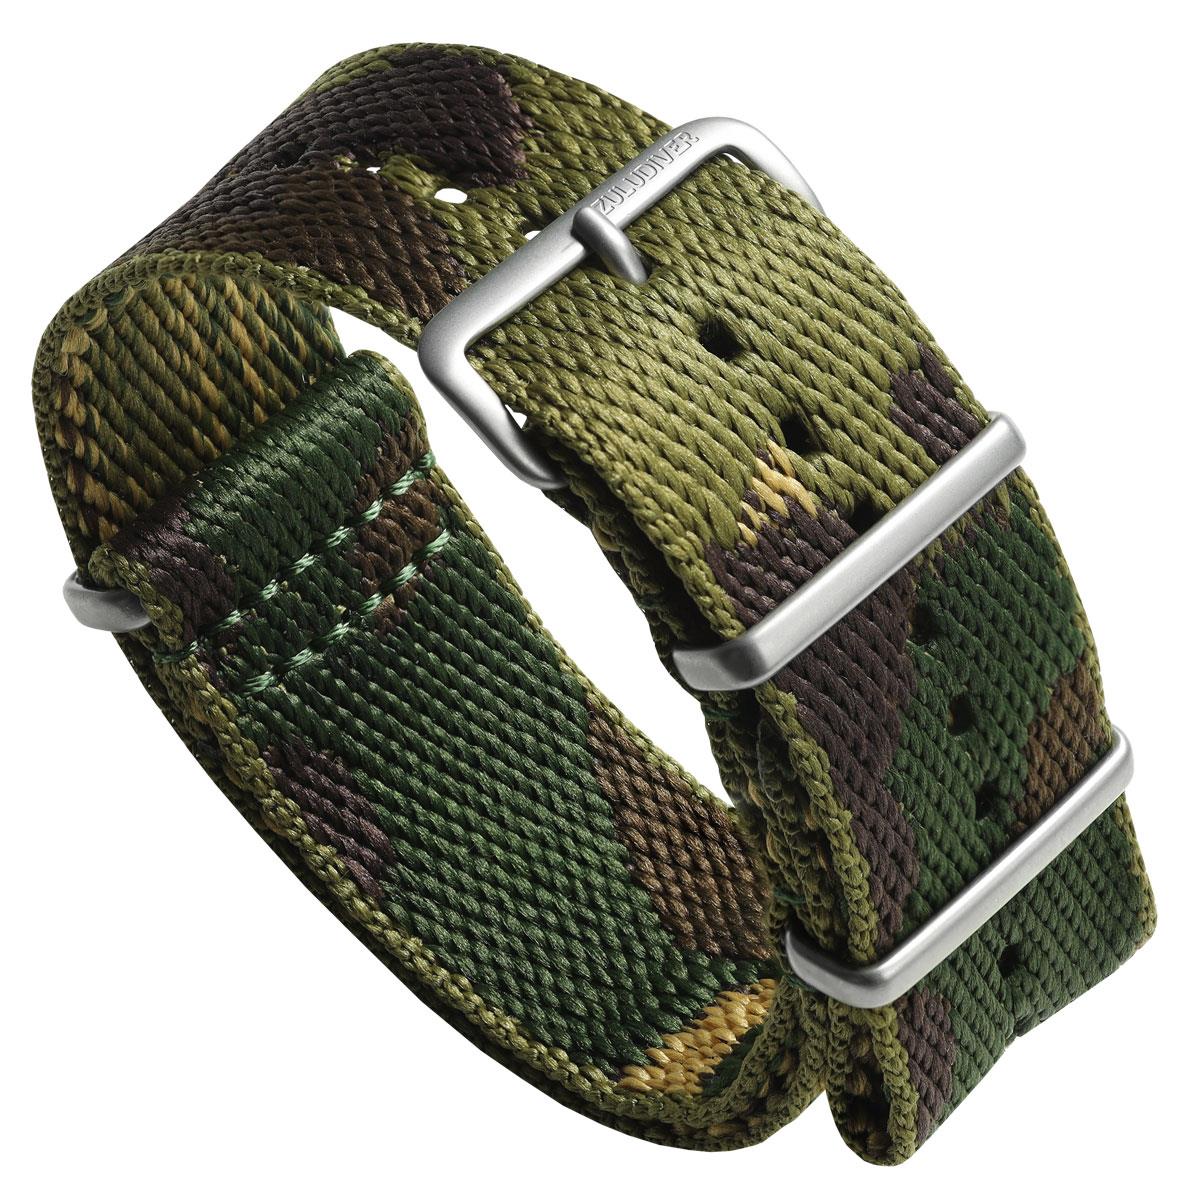 Woven camouflage NATO watch strap with stainless steel satin metal fittings